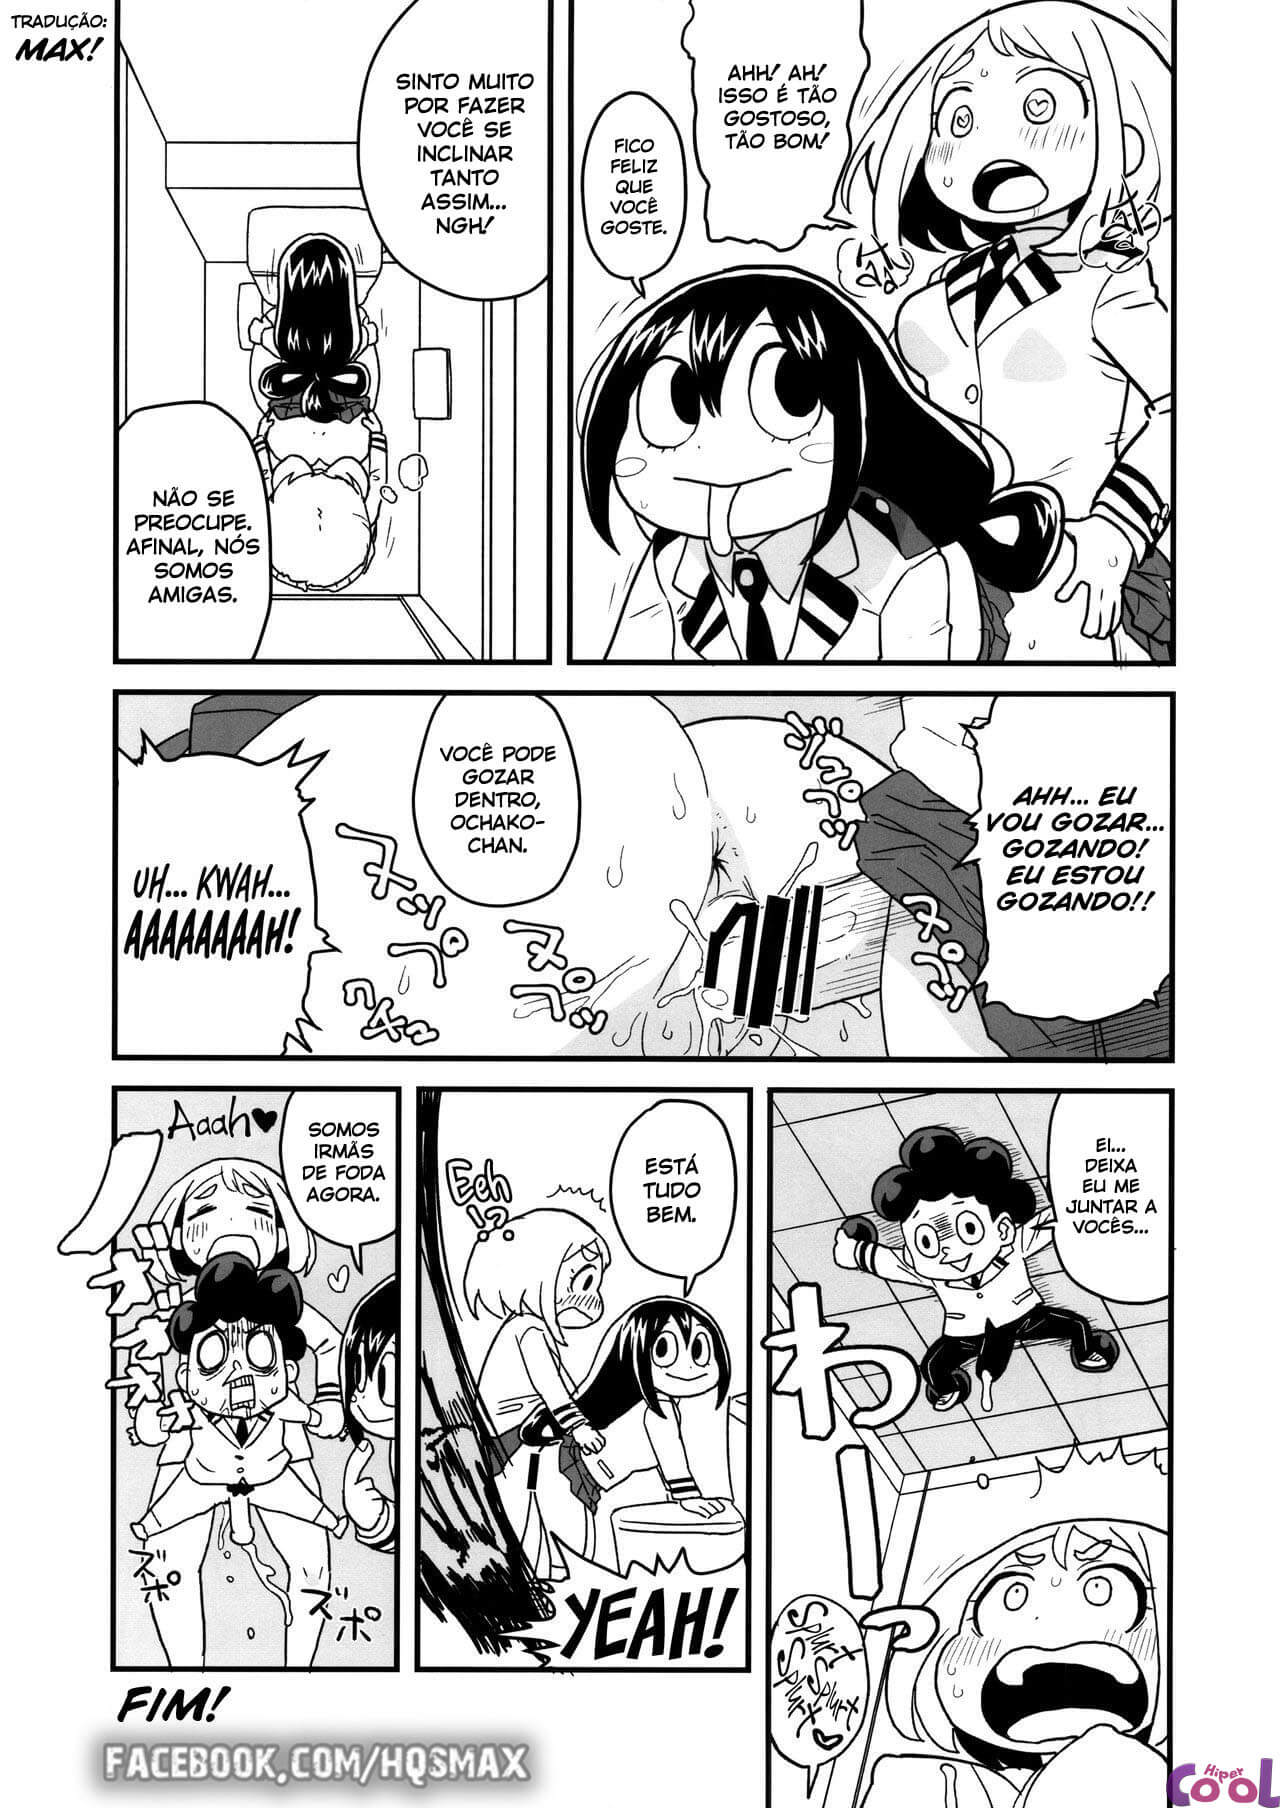 froppy-chapter-01-page-42.jpg